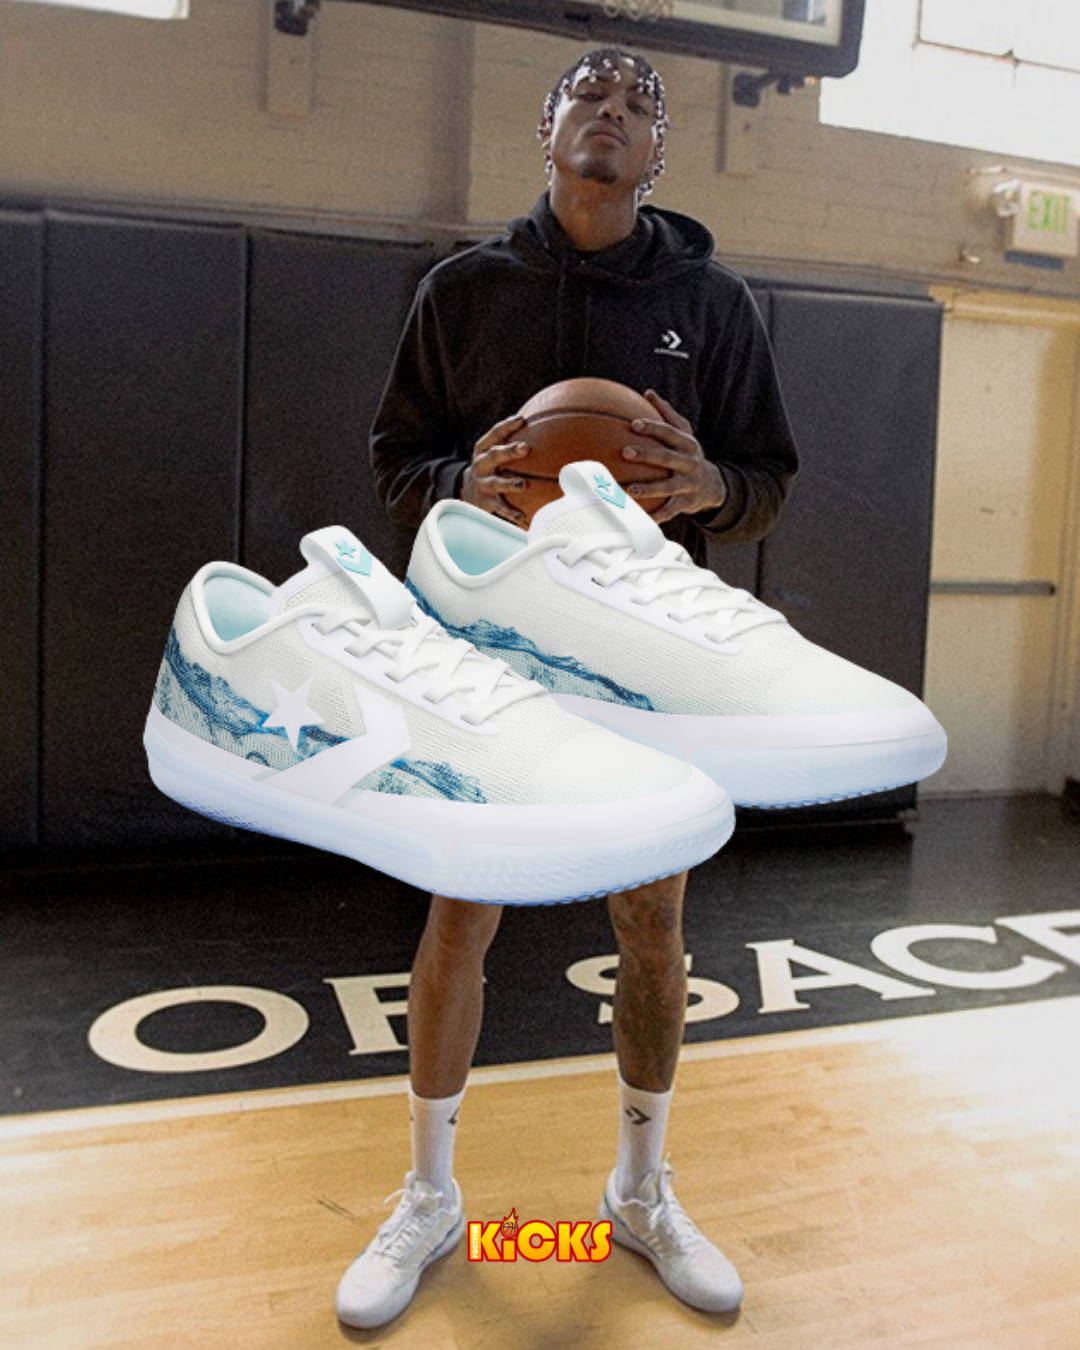 Official Foot Fire Twitter: "Kelly Oubre Jr x Converse All Star Pro BB Low 🌊 OUT Link&gt; https://t.co/7DbYRnTZfP https://t.co/9F1WtrcPpq" / Twitter